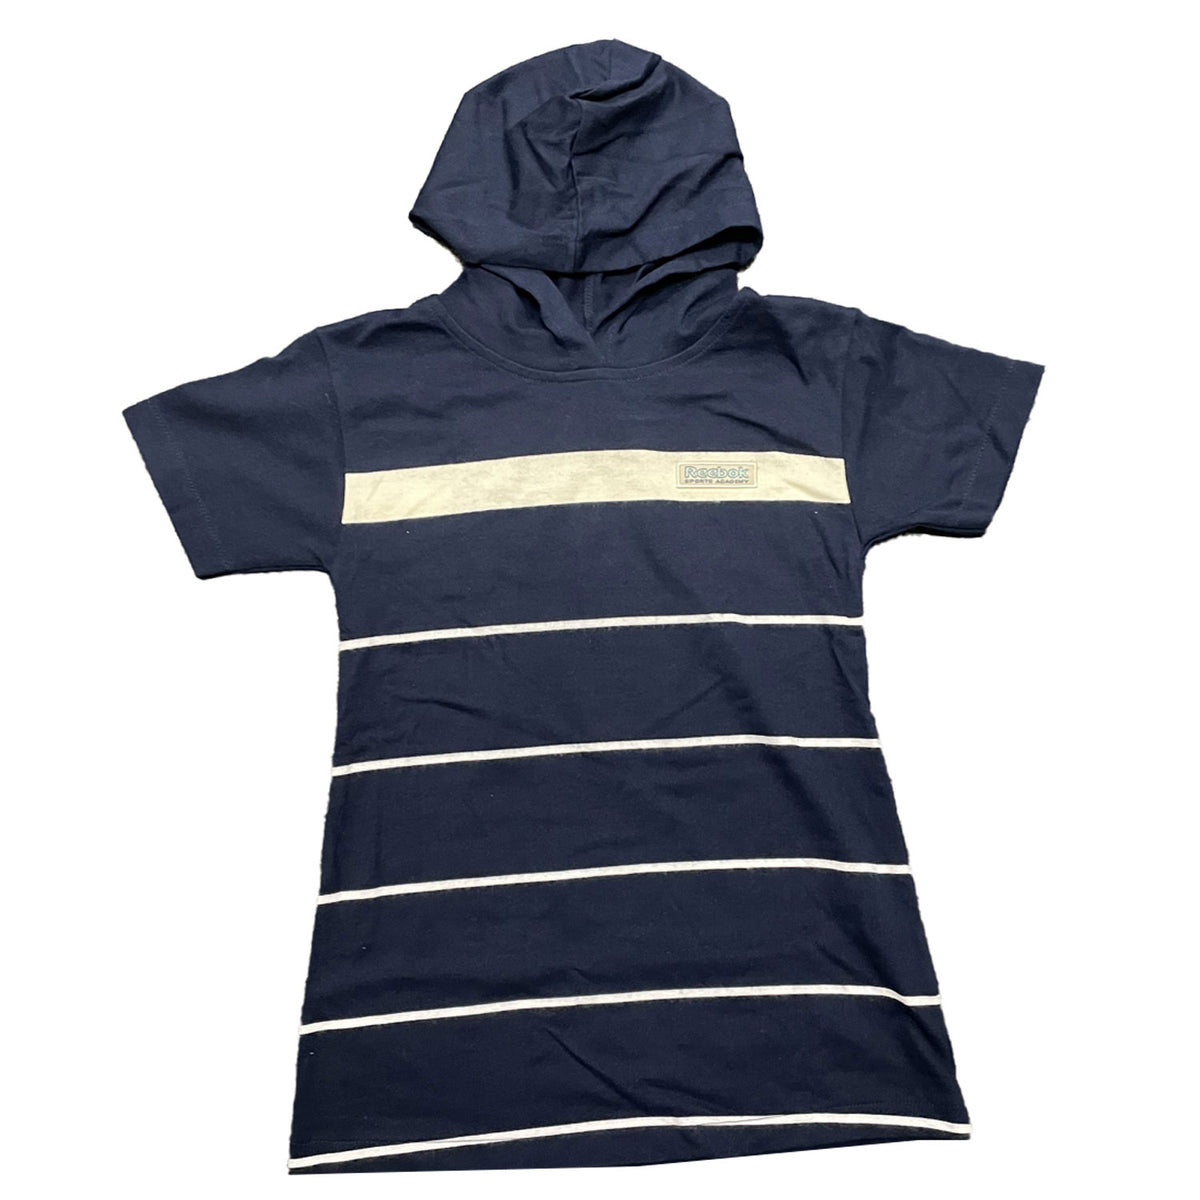 Reebok's Infant Sports Academy Hooded Top